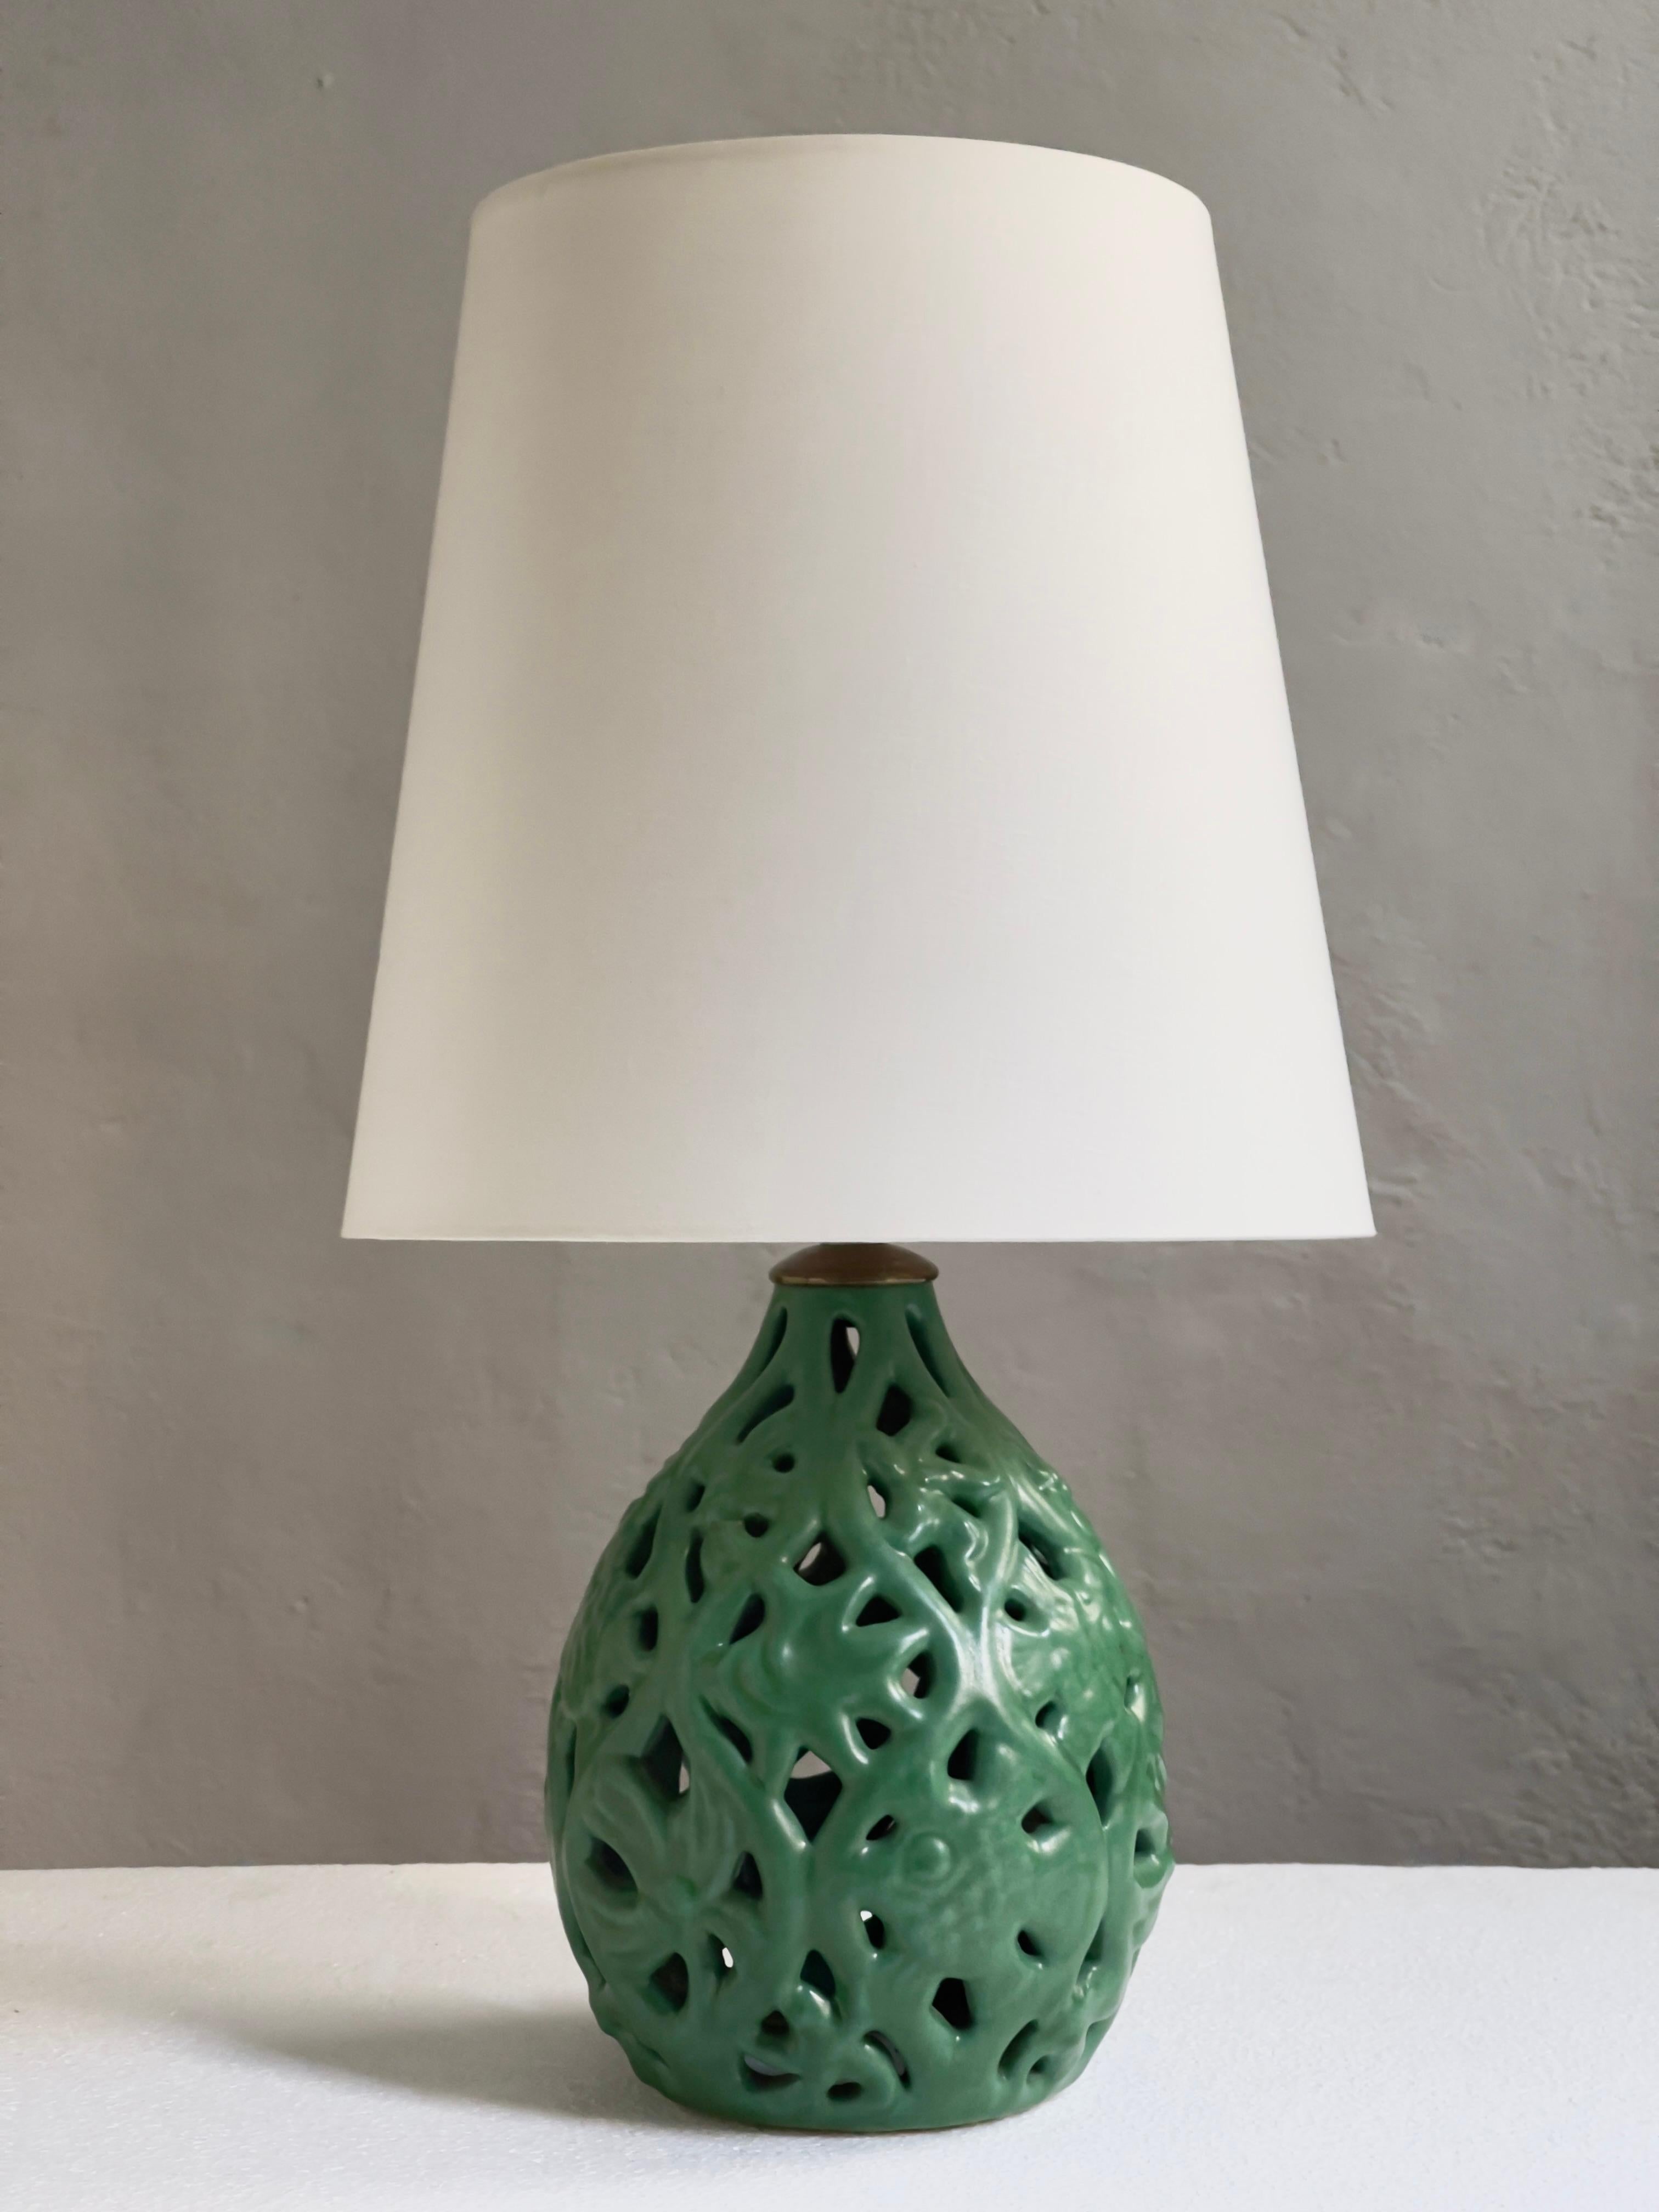 Rare ceramic table lamp from Michael Andersen, Bornholm Denmark 1940s. Rich color and very good condition. No chips.
New fabric wire. Ships without lamp shade.

Base dimension:
High: 23,5 cm (9,25 inch)
Diameter: 17,5 cm (6,88 inch)

Michael